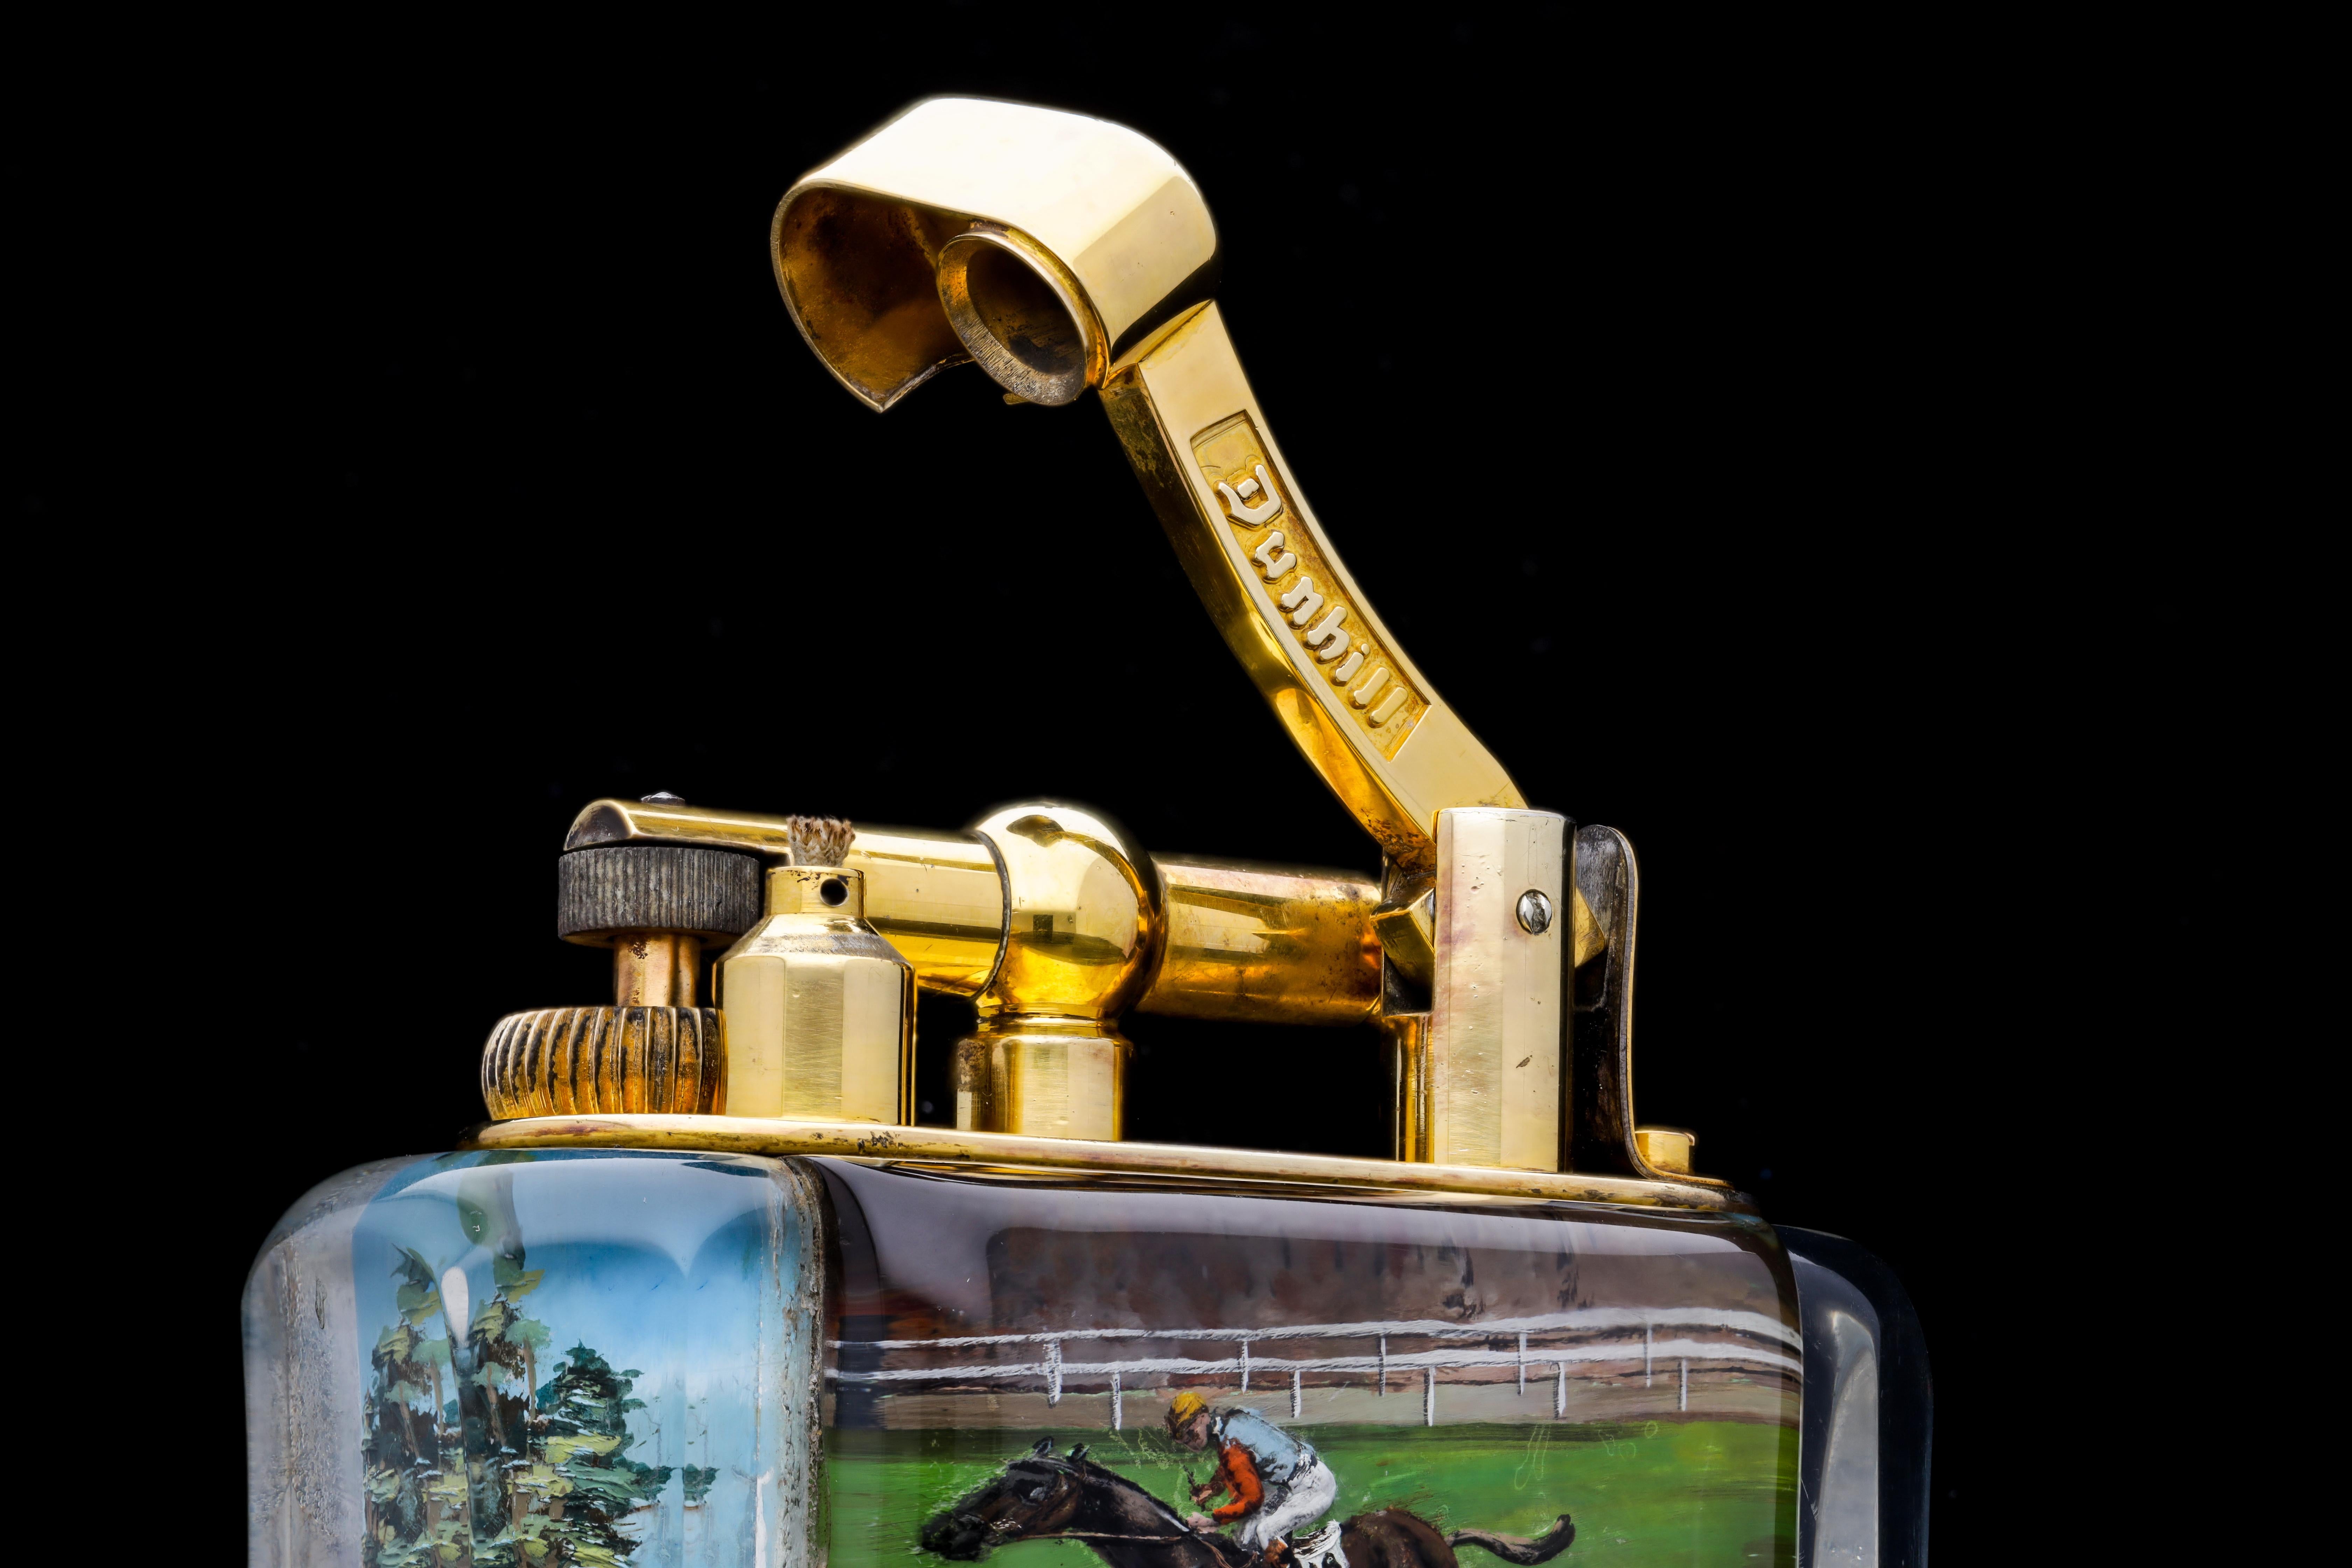 Royal Hunt Cup Ascot 1955 Winner - Horse Racing Dunhill 'Aquarium' Table Lighter In Excellent Condition For Sale In London, by appointment only